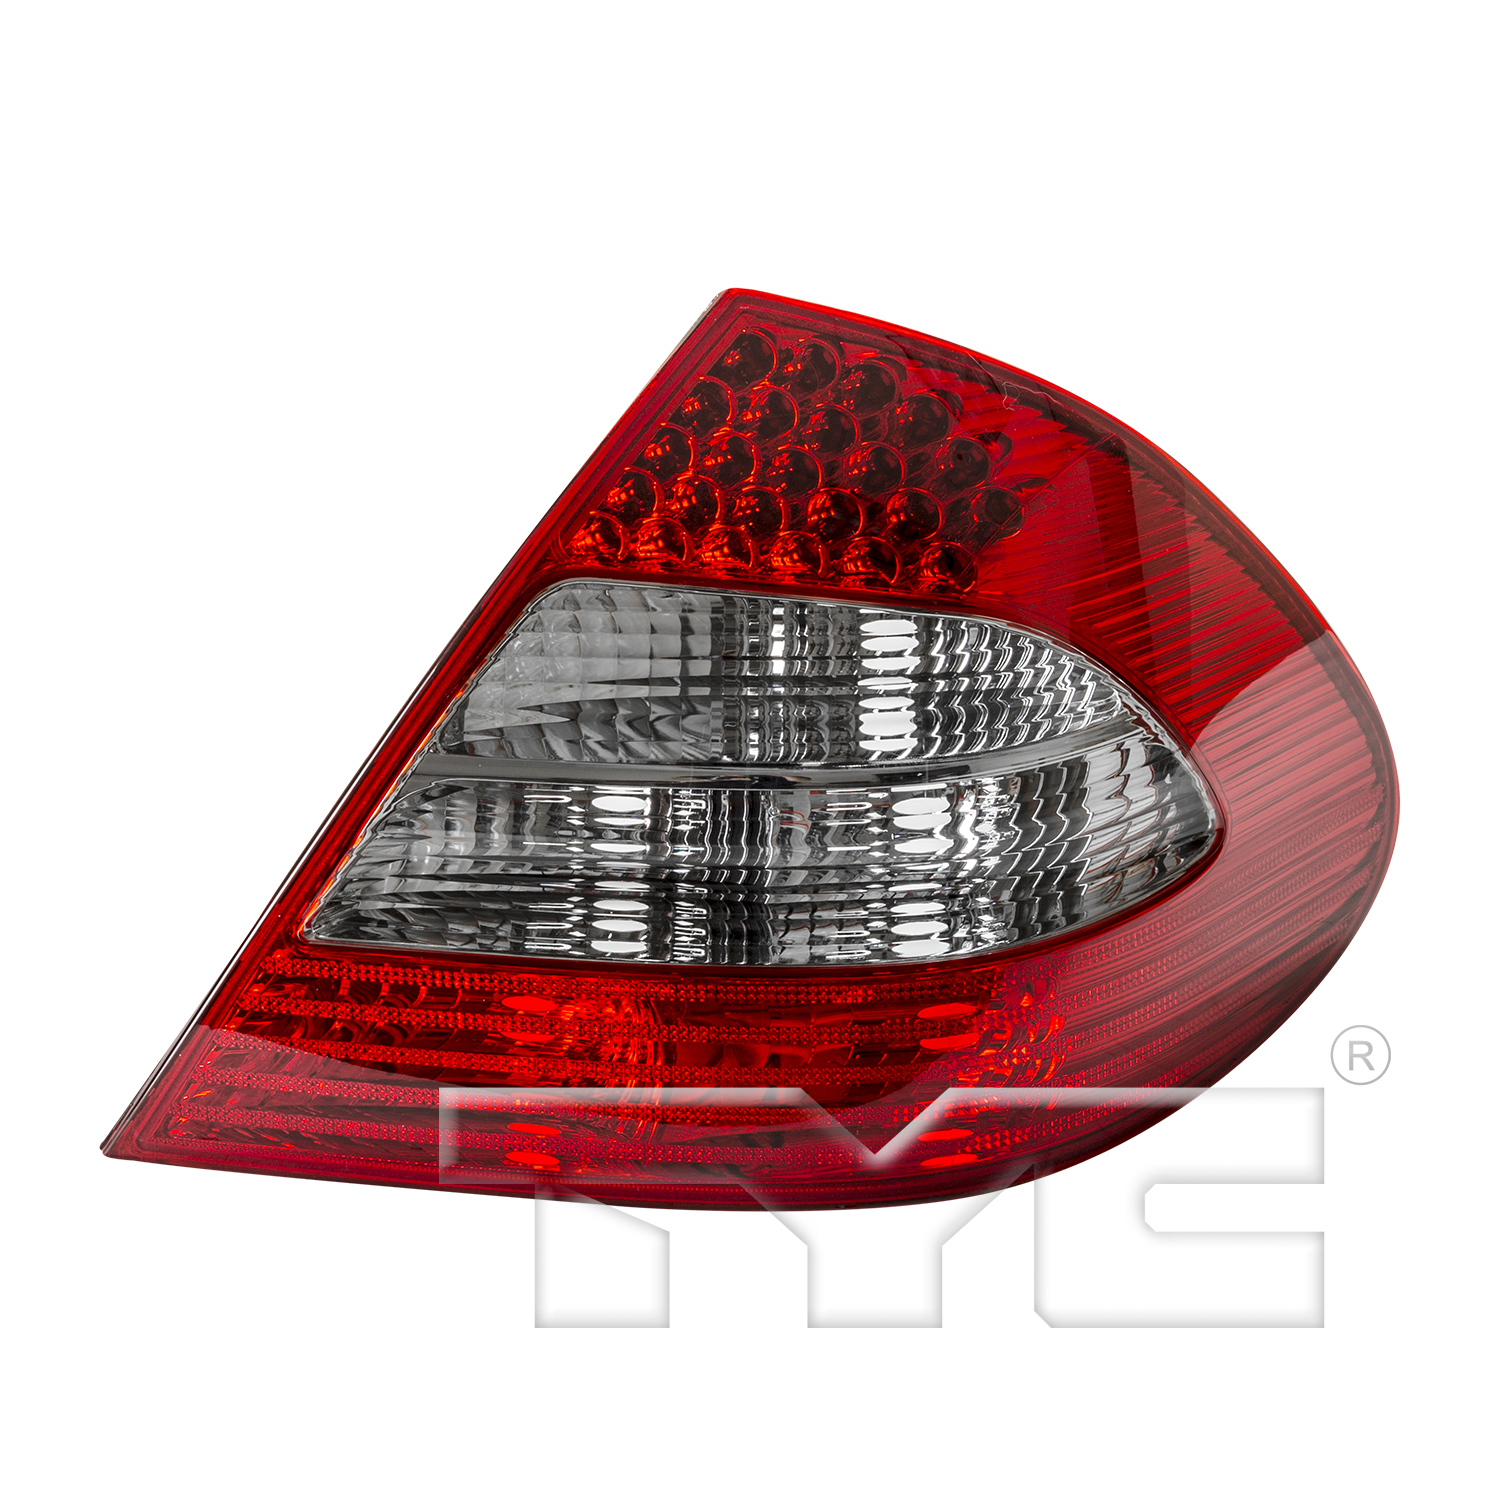 Aftermarket TAILLIGHTS for MERCEDES-BENZ - E550, E550,07-09,RT Taillamp assy